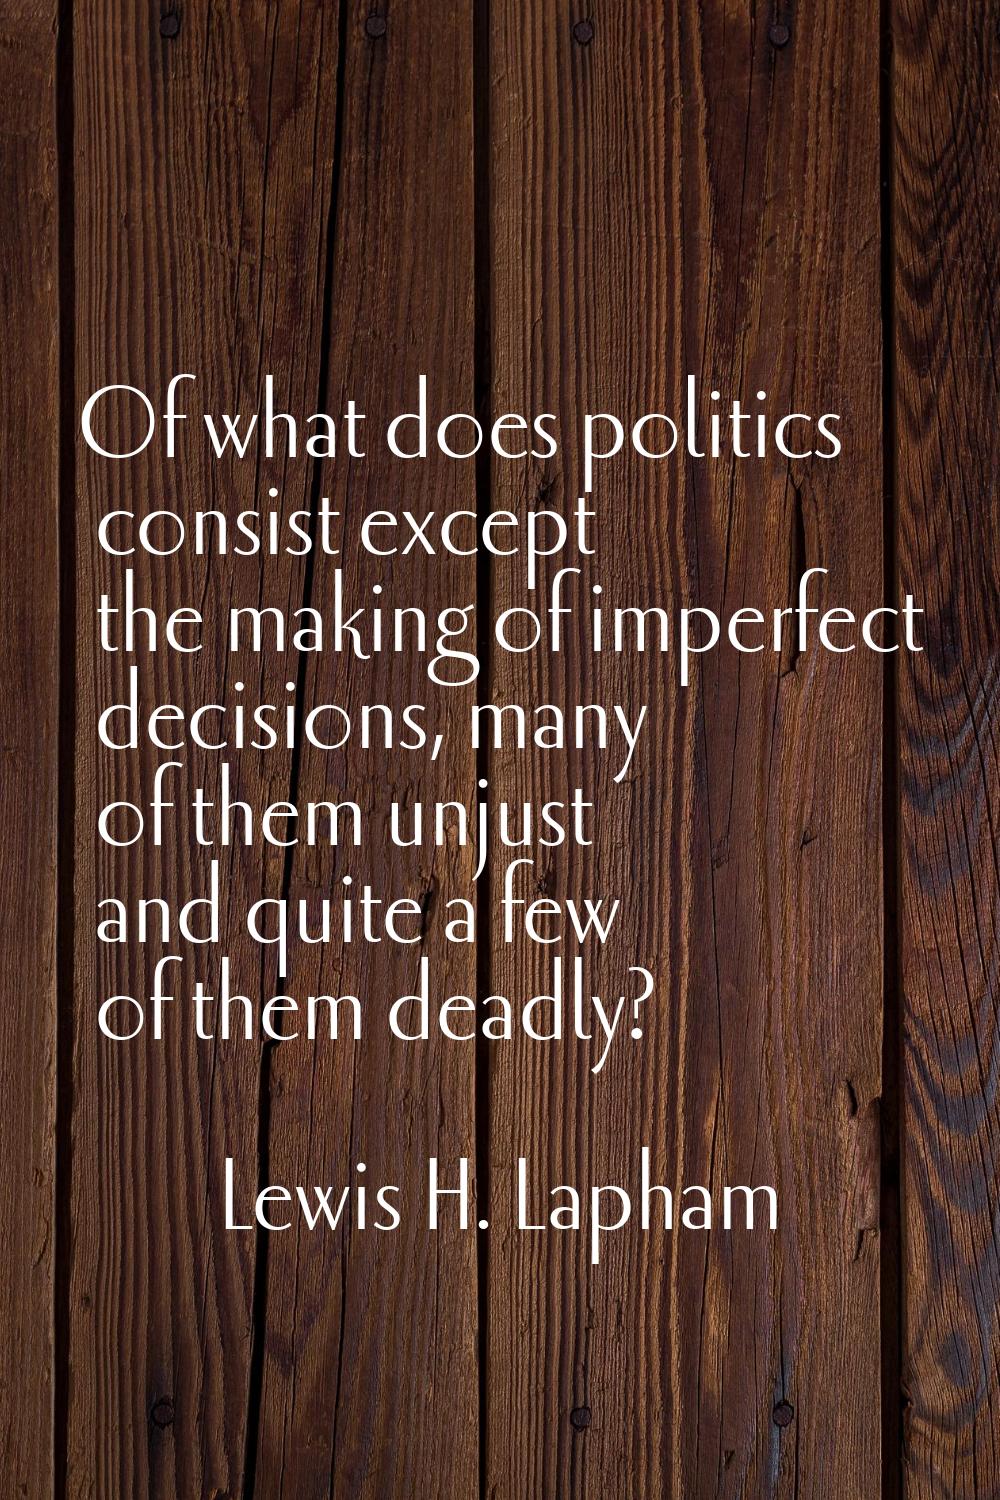 Of what does politics consist except the making of imperfect decisions, many of them unjust and qui